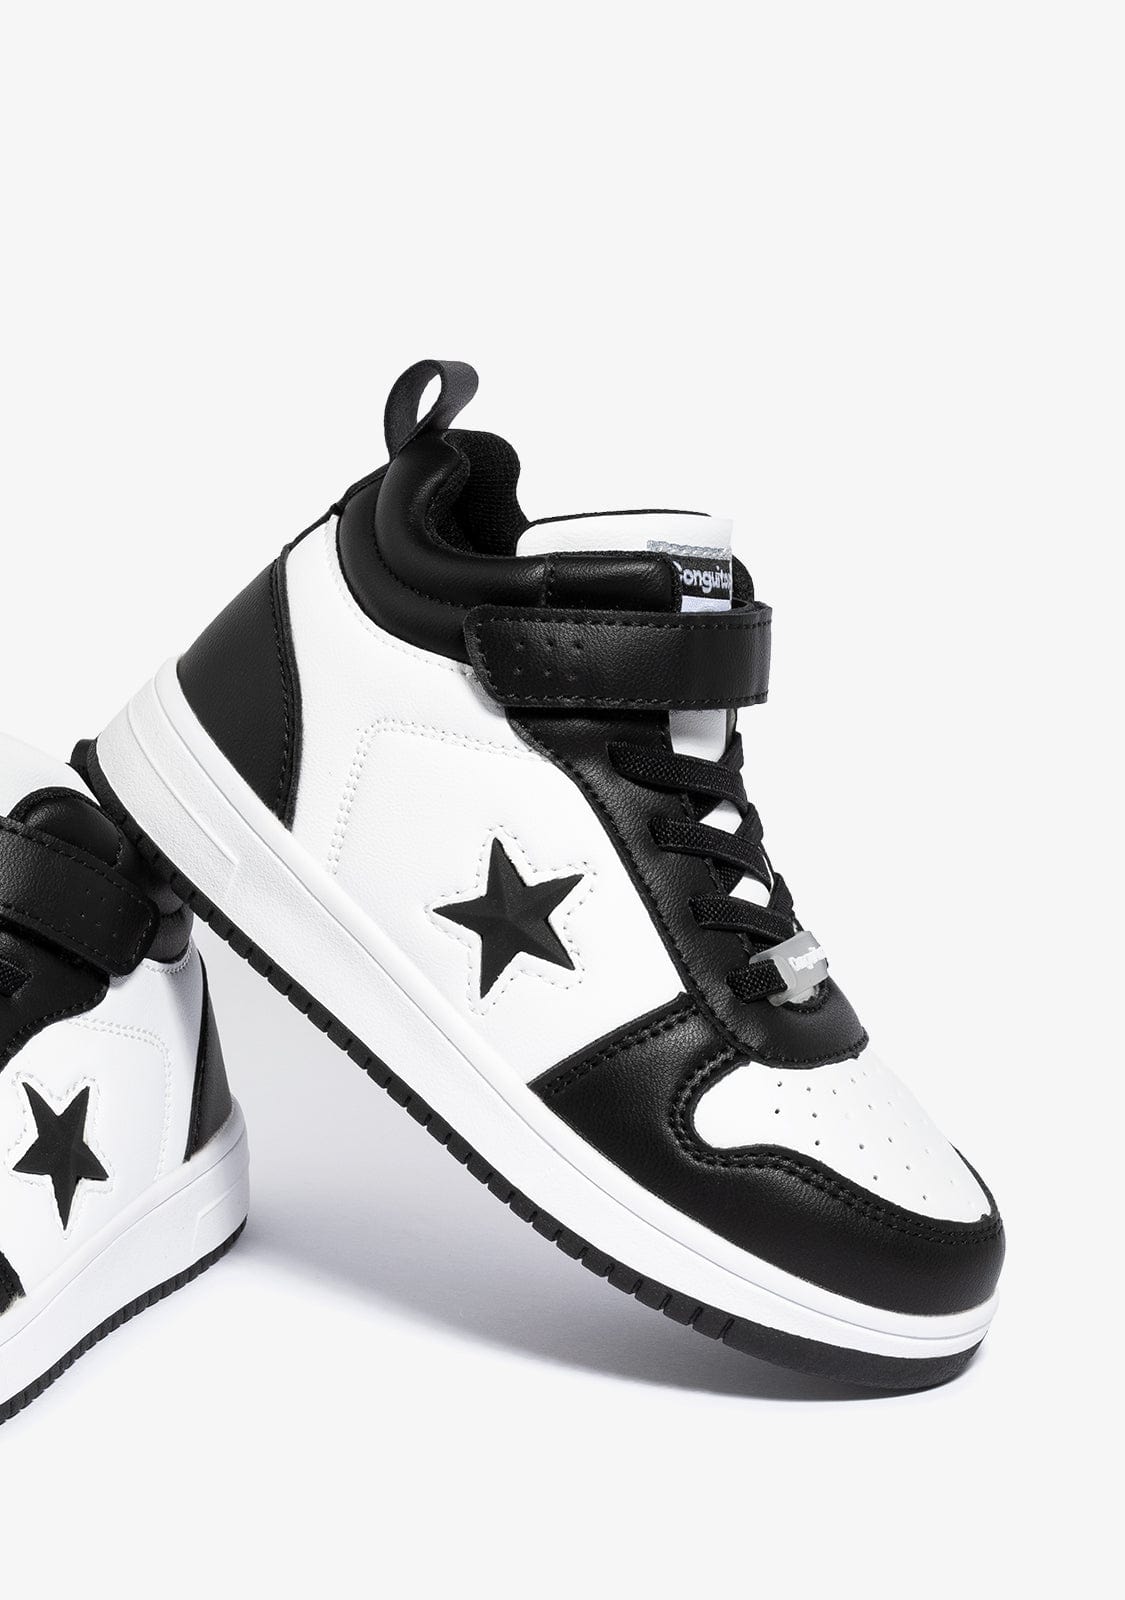 CONGUITOS Shoes Unisex Black White With Lights Hi-Top Sneakers Napa